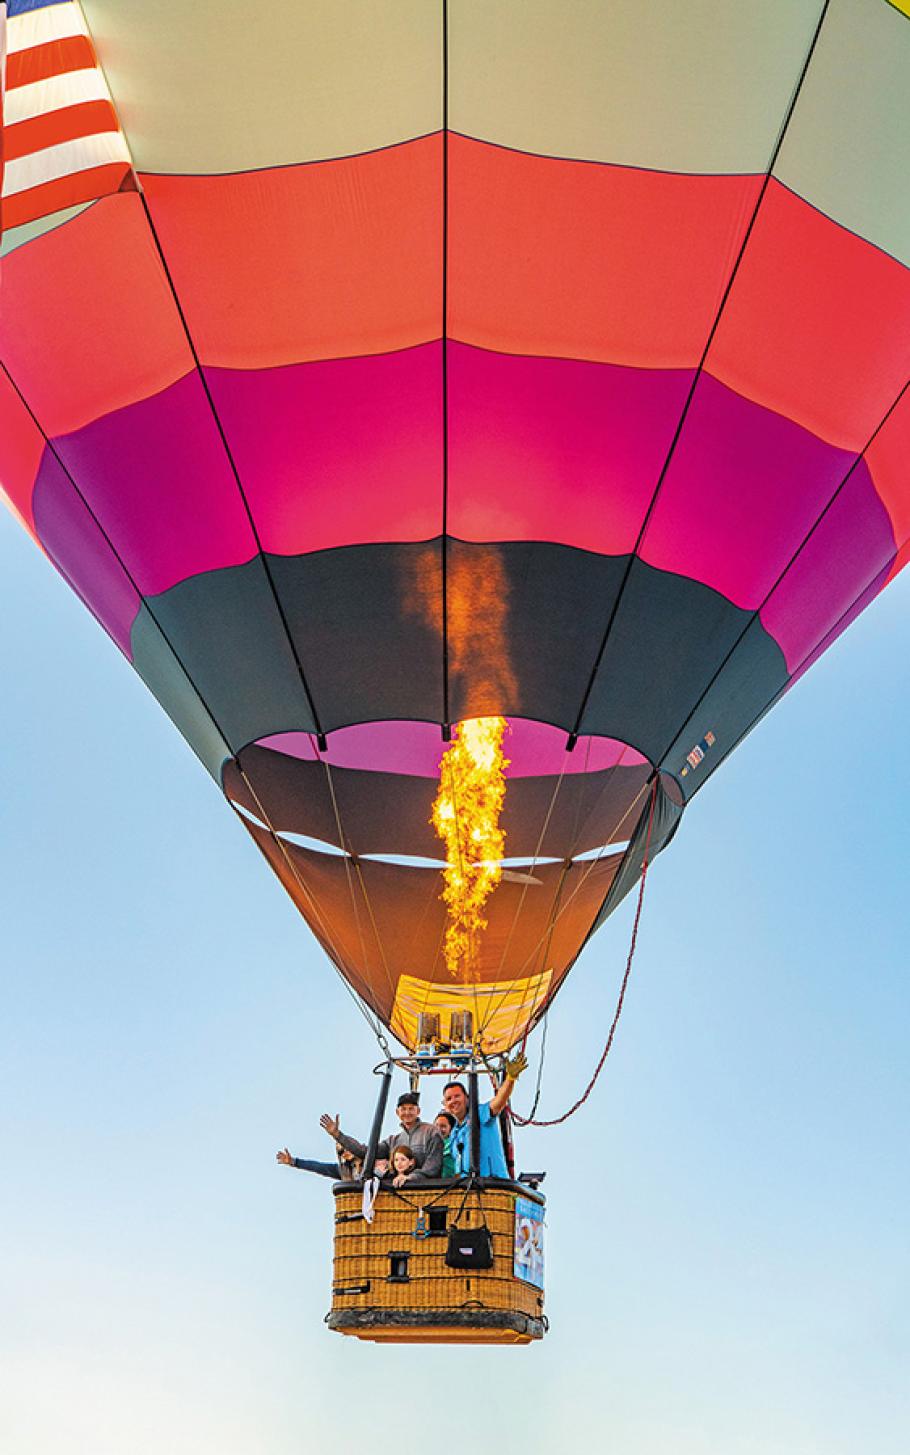 In mid-air, a black-, magenta-, and coral-colored balloon is inflated by a long flame from the burner. Suspended below the balloon is a wicker basket carrying at least five people, men and women and one girl. The people are waving and smiling. 